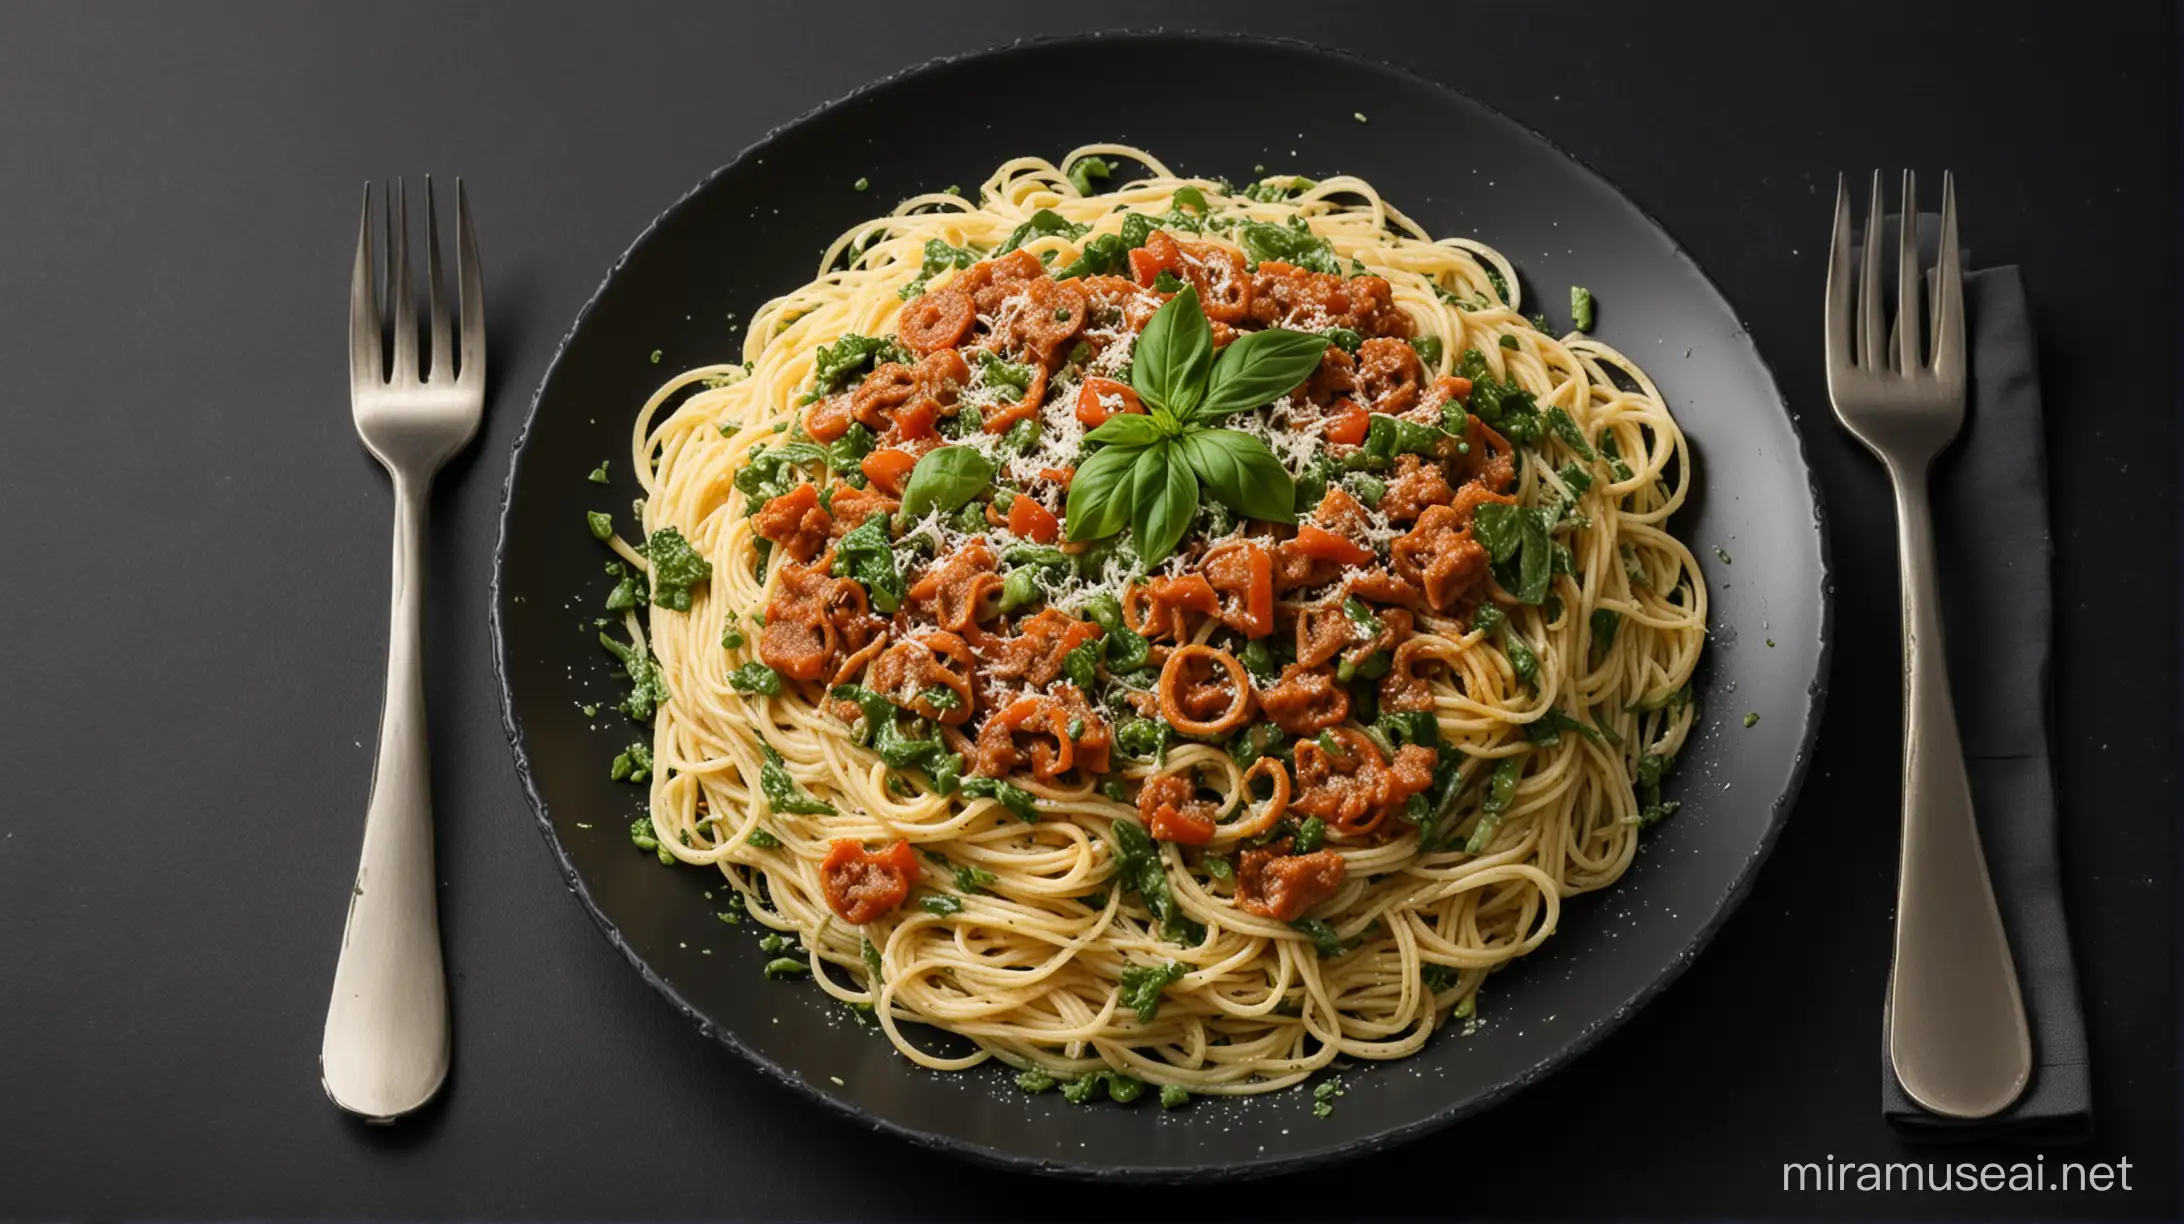 Spaghetti meal with a black background and something green colored in them